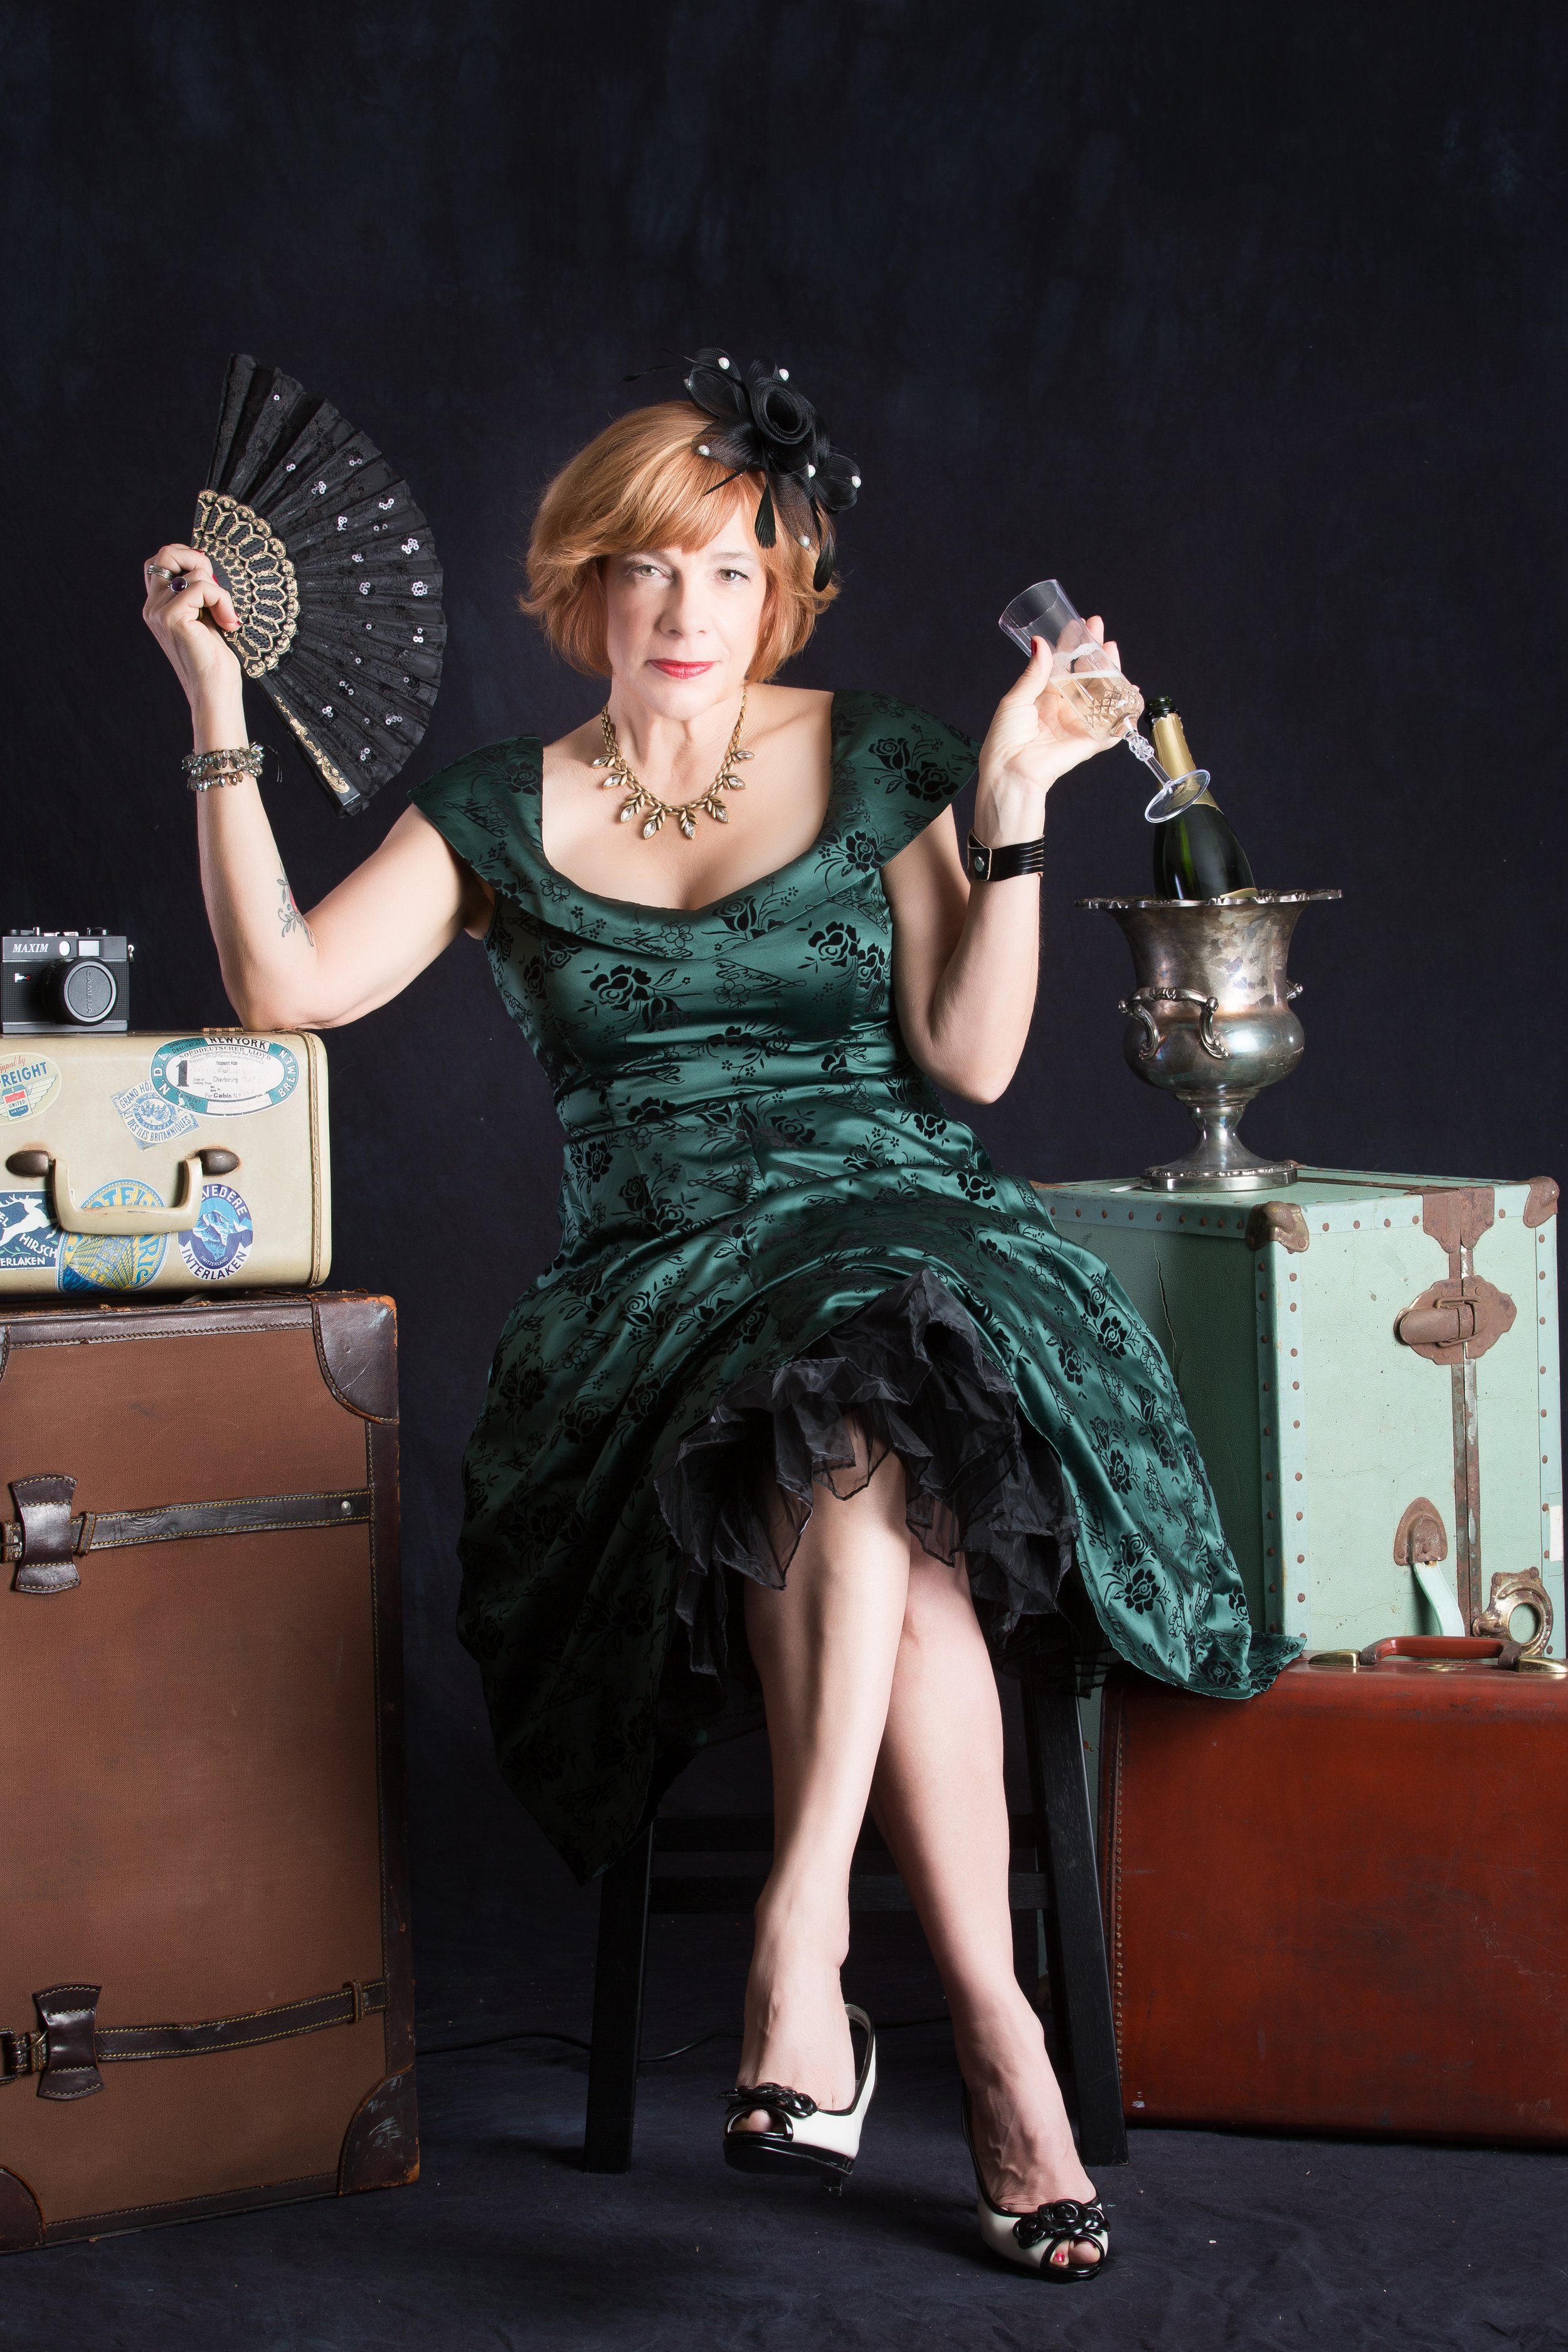 Promotional Headshots marketing and branding photoshoot redheaded woman in green lace dress with fan and cocktails performance 